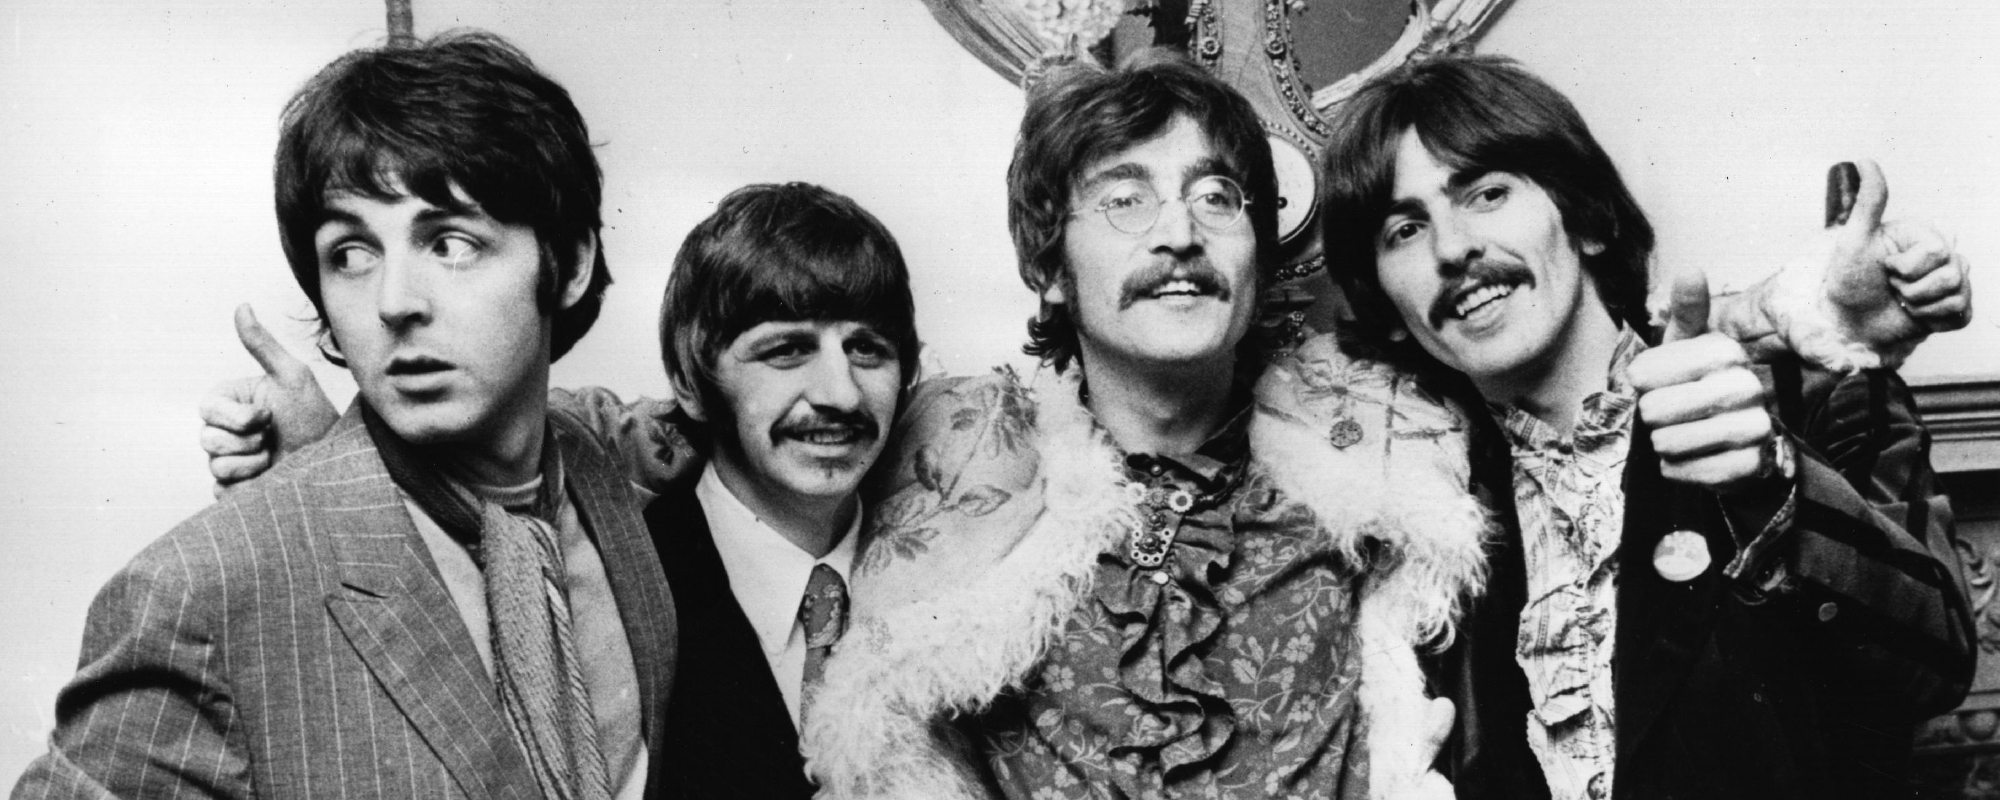 Remember When: The Beatles Release ‘Sgt. Pepper’s Lonely Hearts Club Band’ in 1967